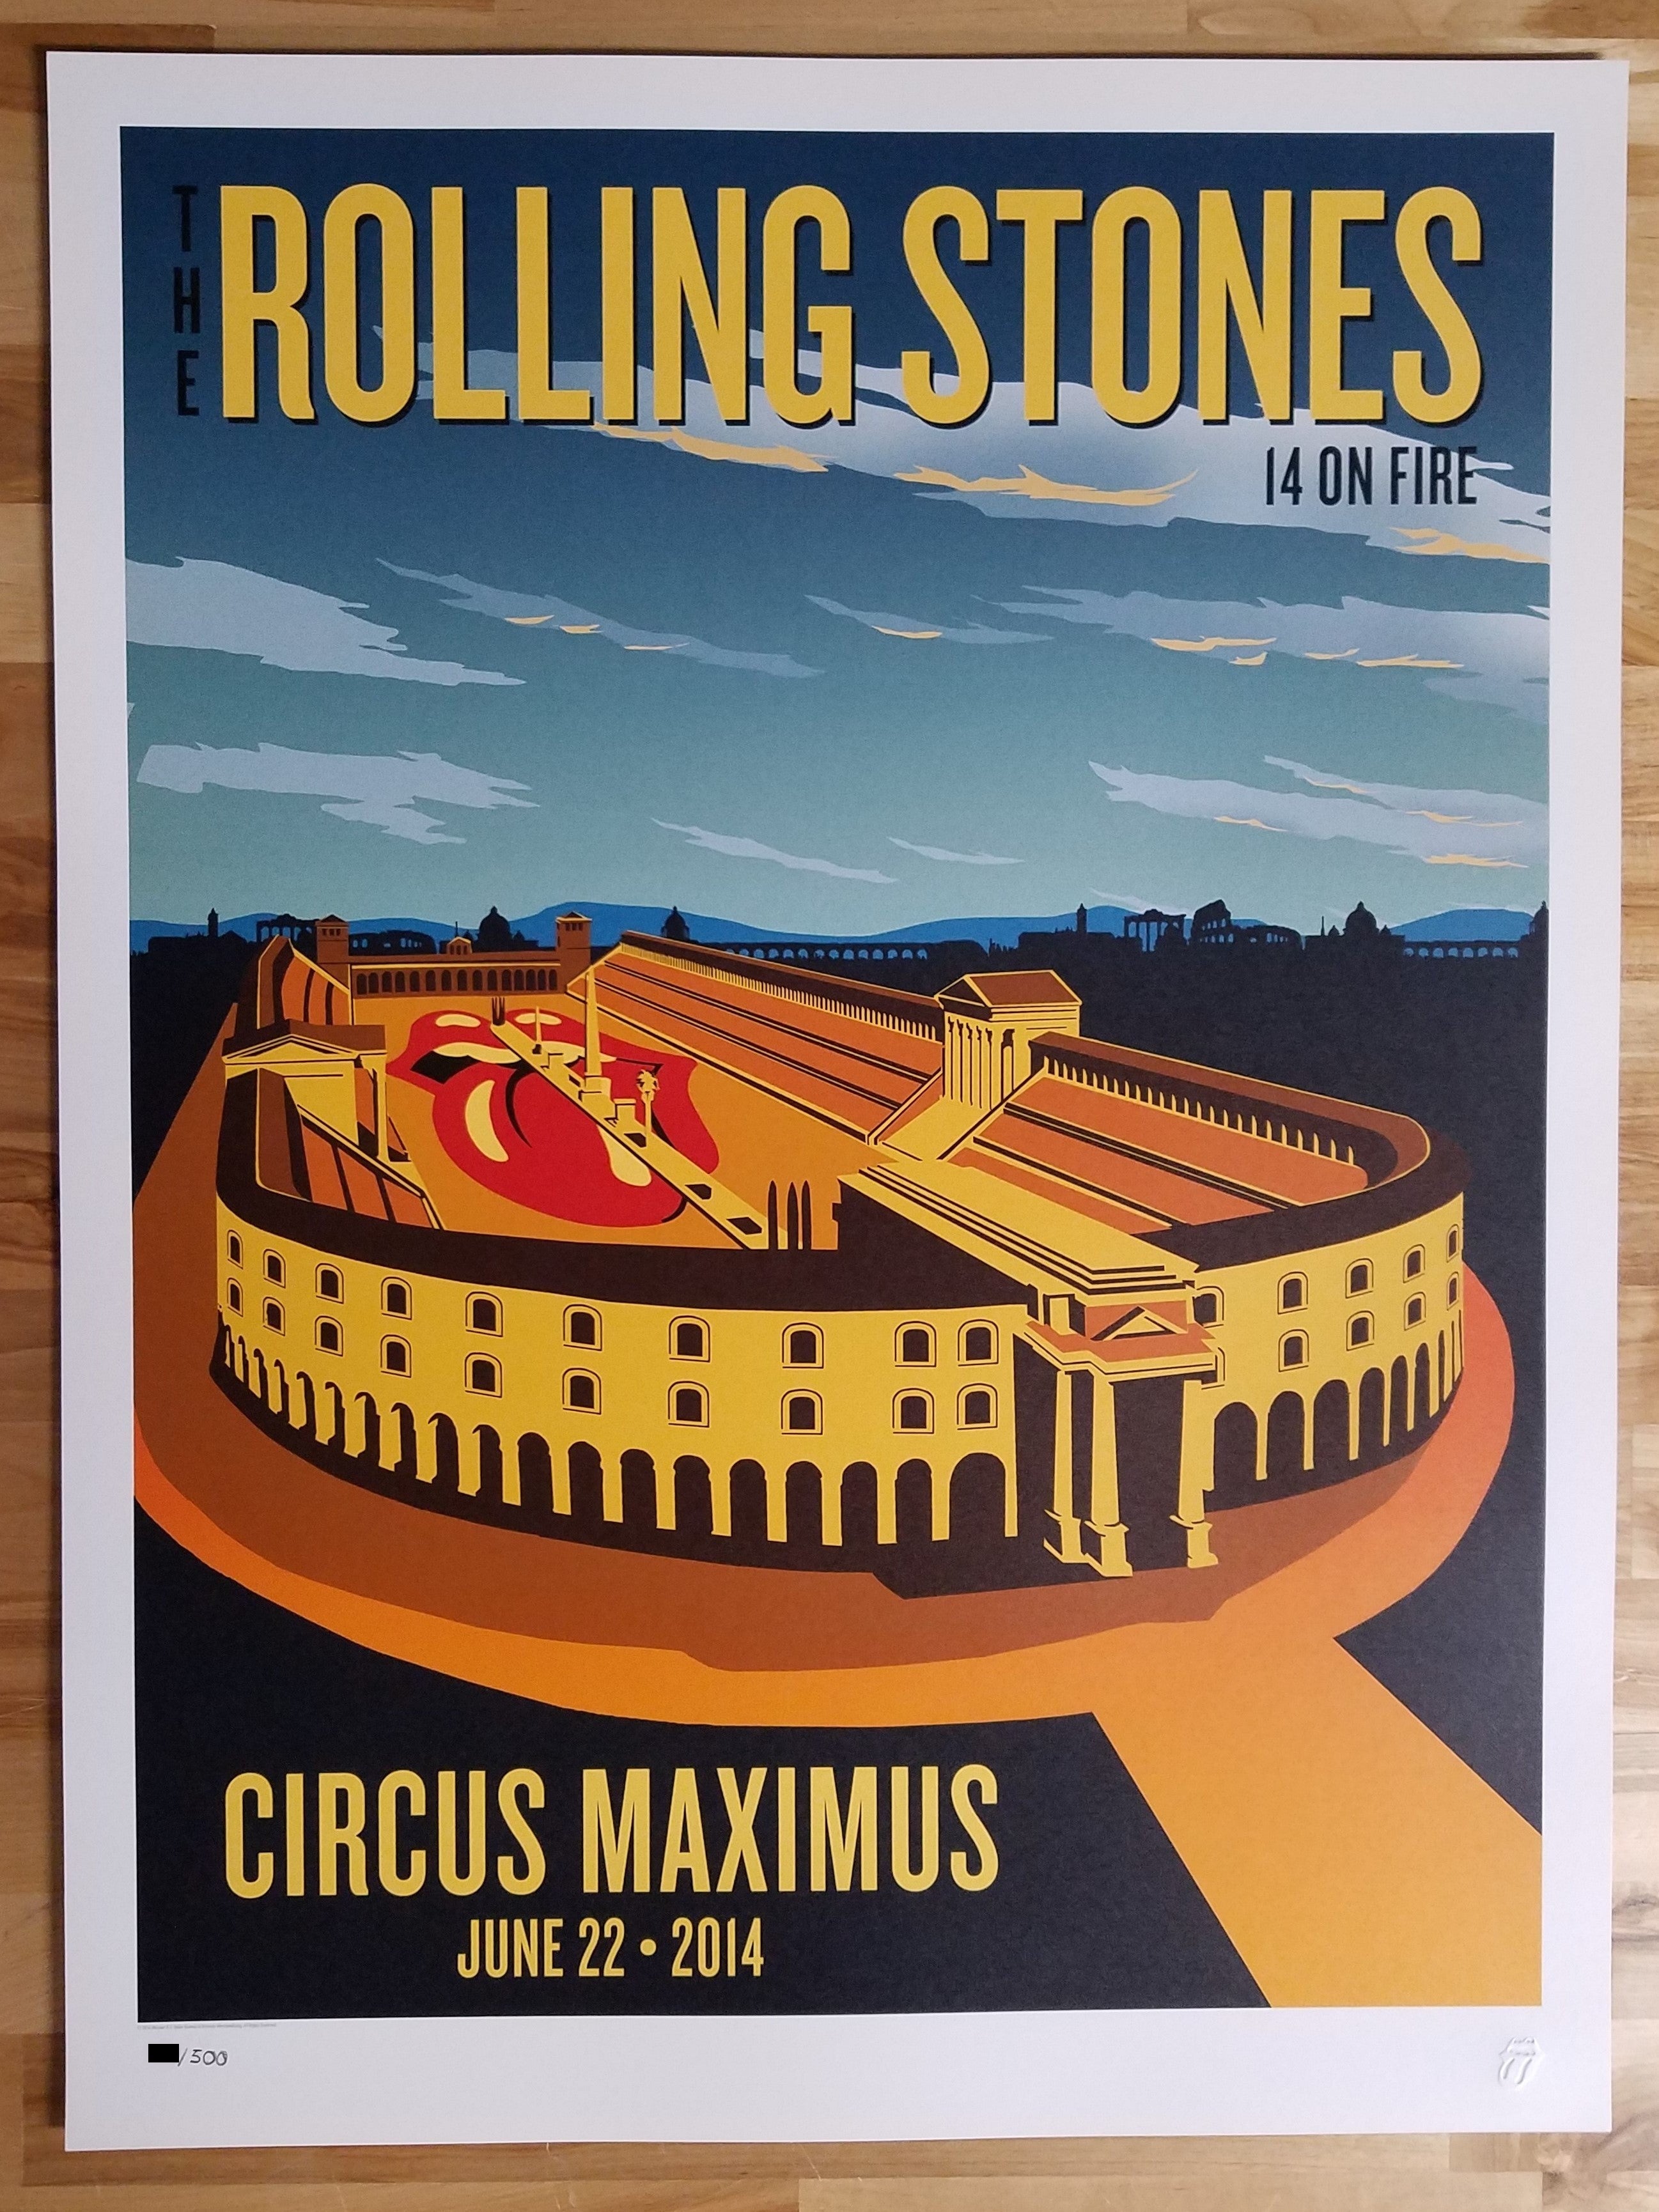 Title:  The Rolling Stones - 2014 OFFICIAL POSTER ROME, ITALY #2  Poster artist:   Edition:  xx/500  Type:  Lithograph   Size: 17" x 23"  Location: Rome Italy   Venue: Circus Maximus   Notes:  1st edition, official poster hand numbered and embossed.  Official poster, Europe 14 On Fire Tour original from the show!